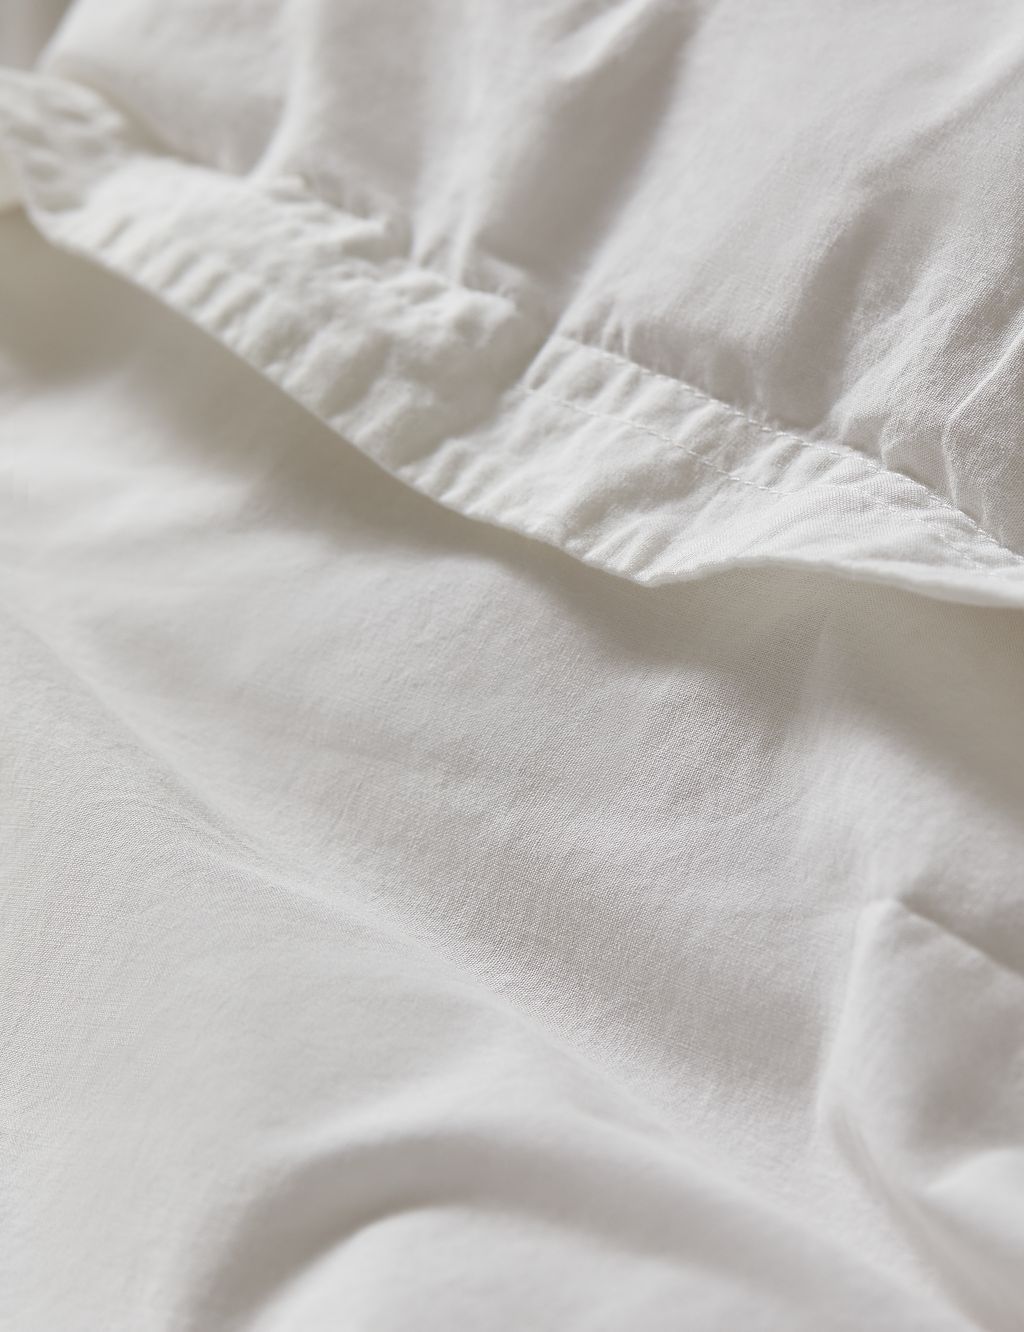 Washed Cotton Duvet Cover image 3